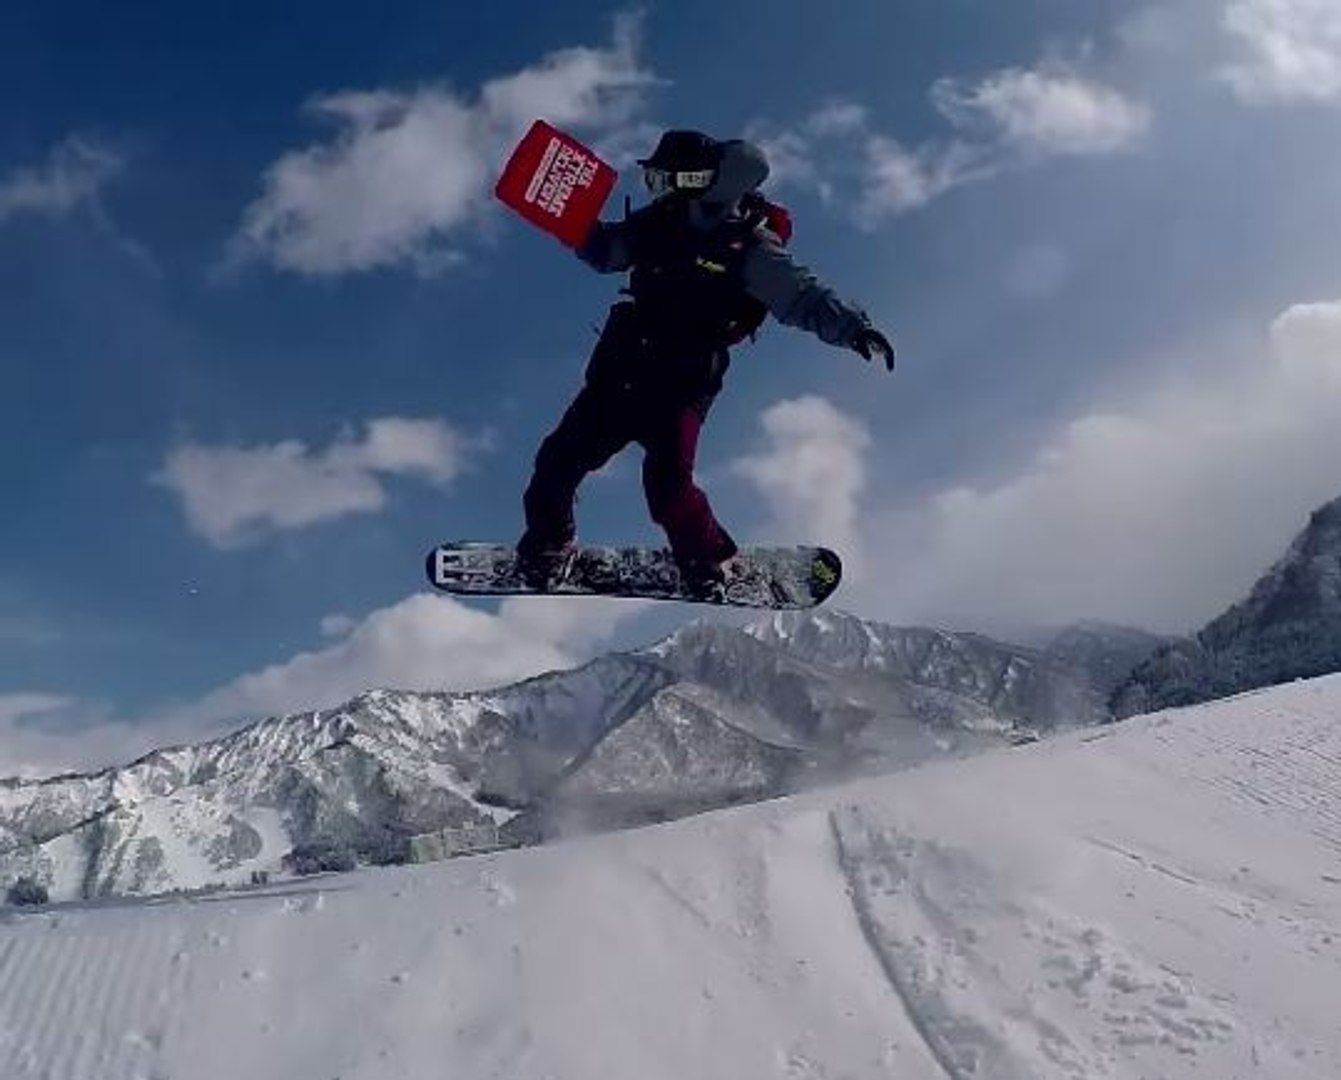 EXTREME PIZZA DELIVERY ON SNOWBOARD - Vidéo Dailymotion